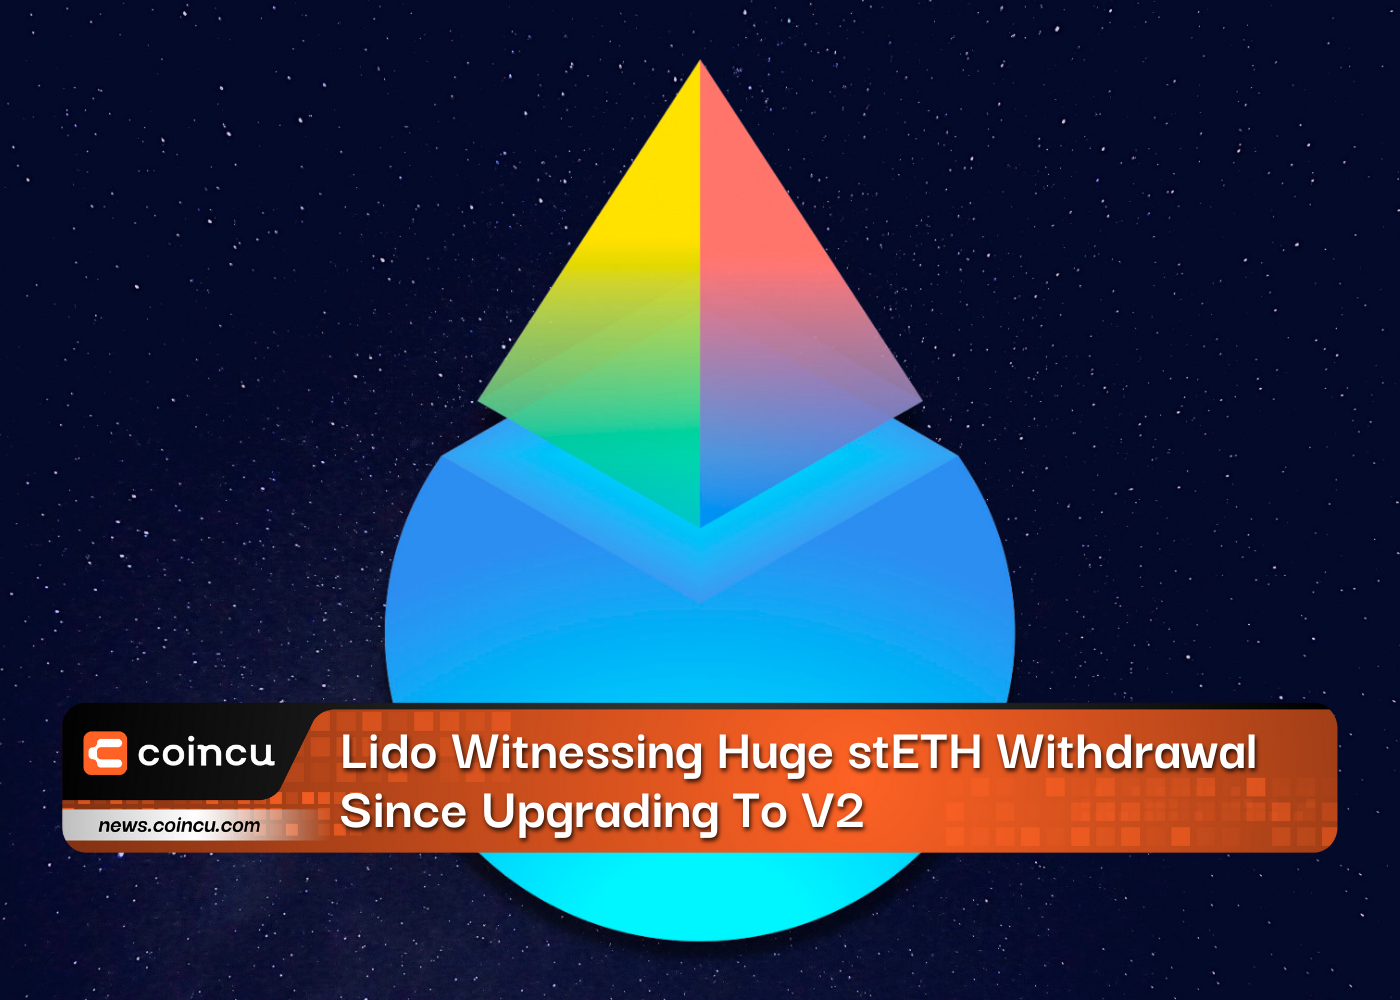 Lido Witnessing Huge stETH Withdrawal Since Upgrading To V2